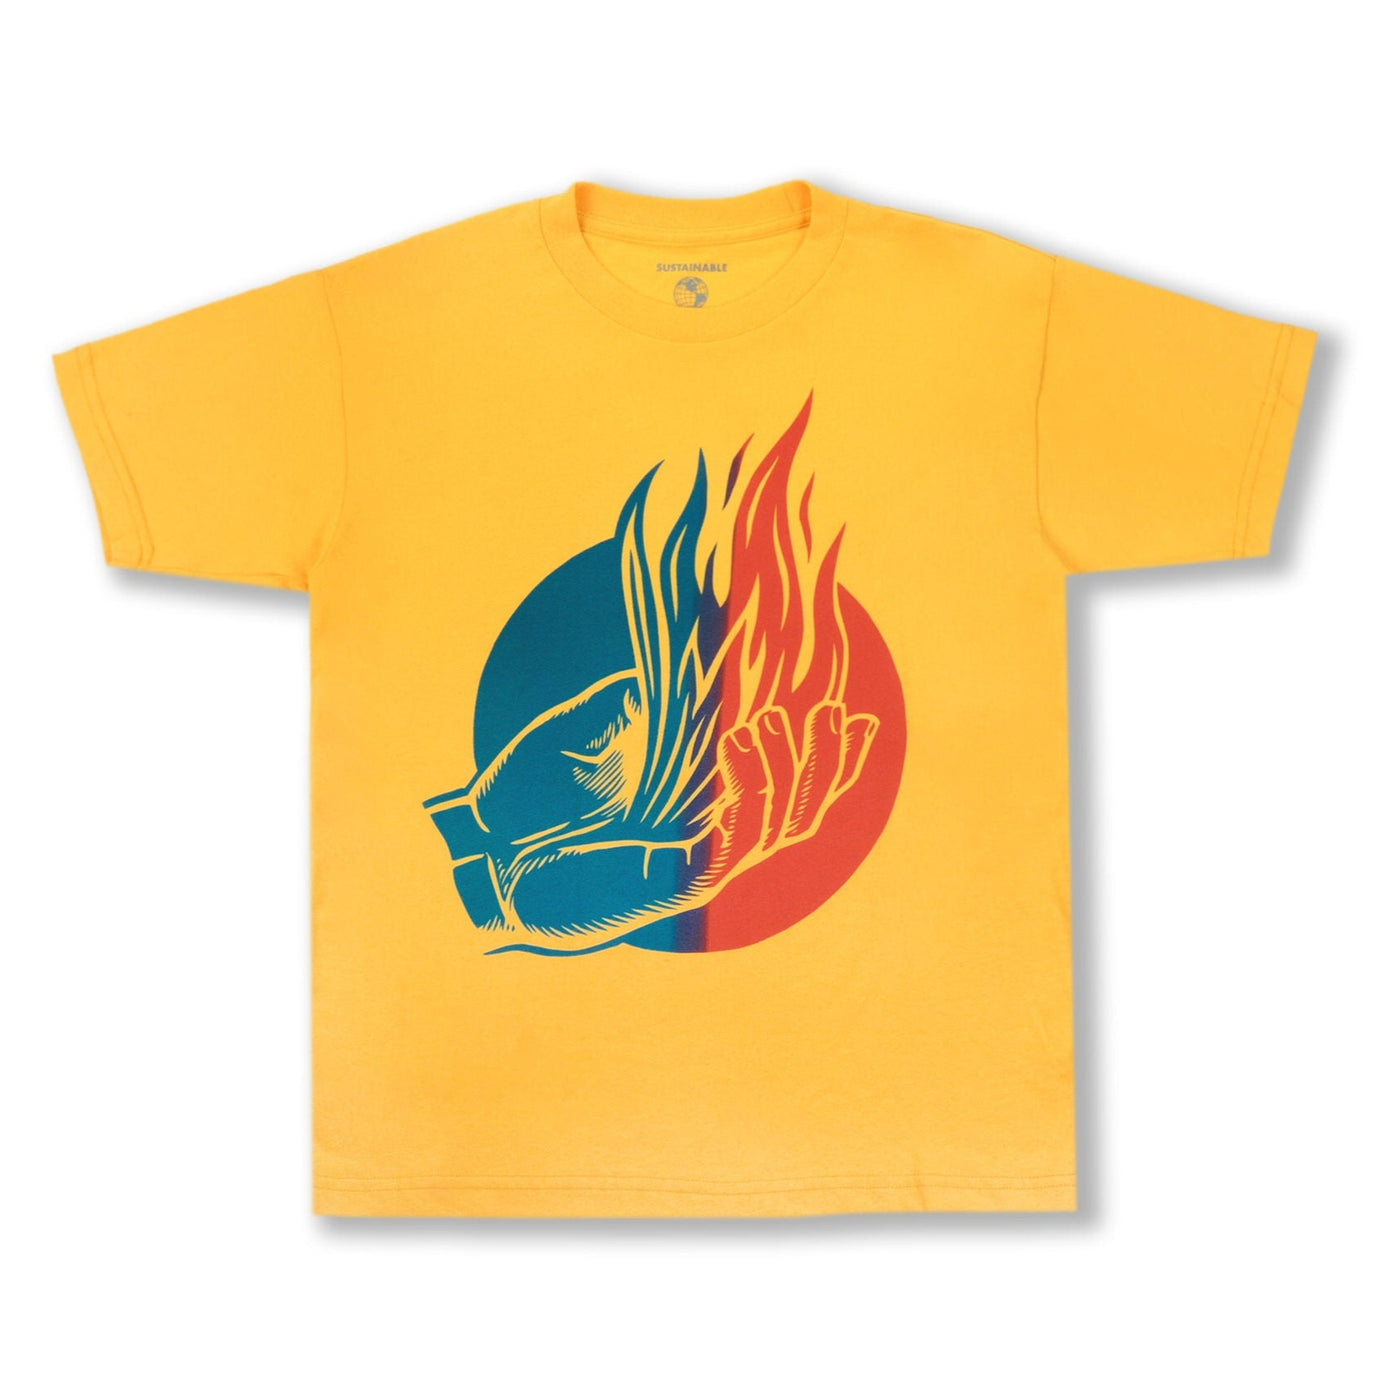 OBEY FLAMES CLASSIC T-SHIRT YELLOW